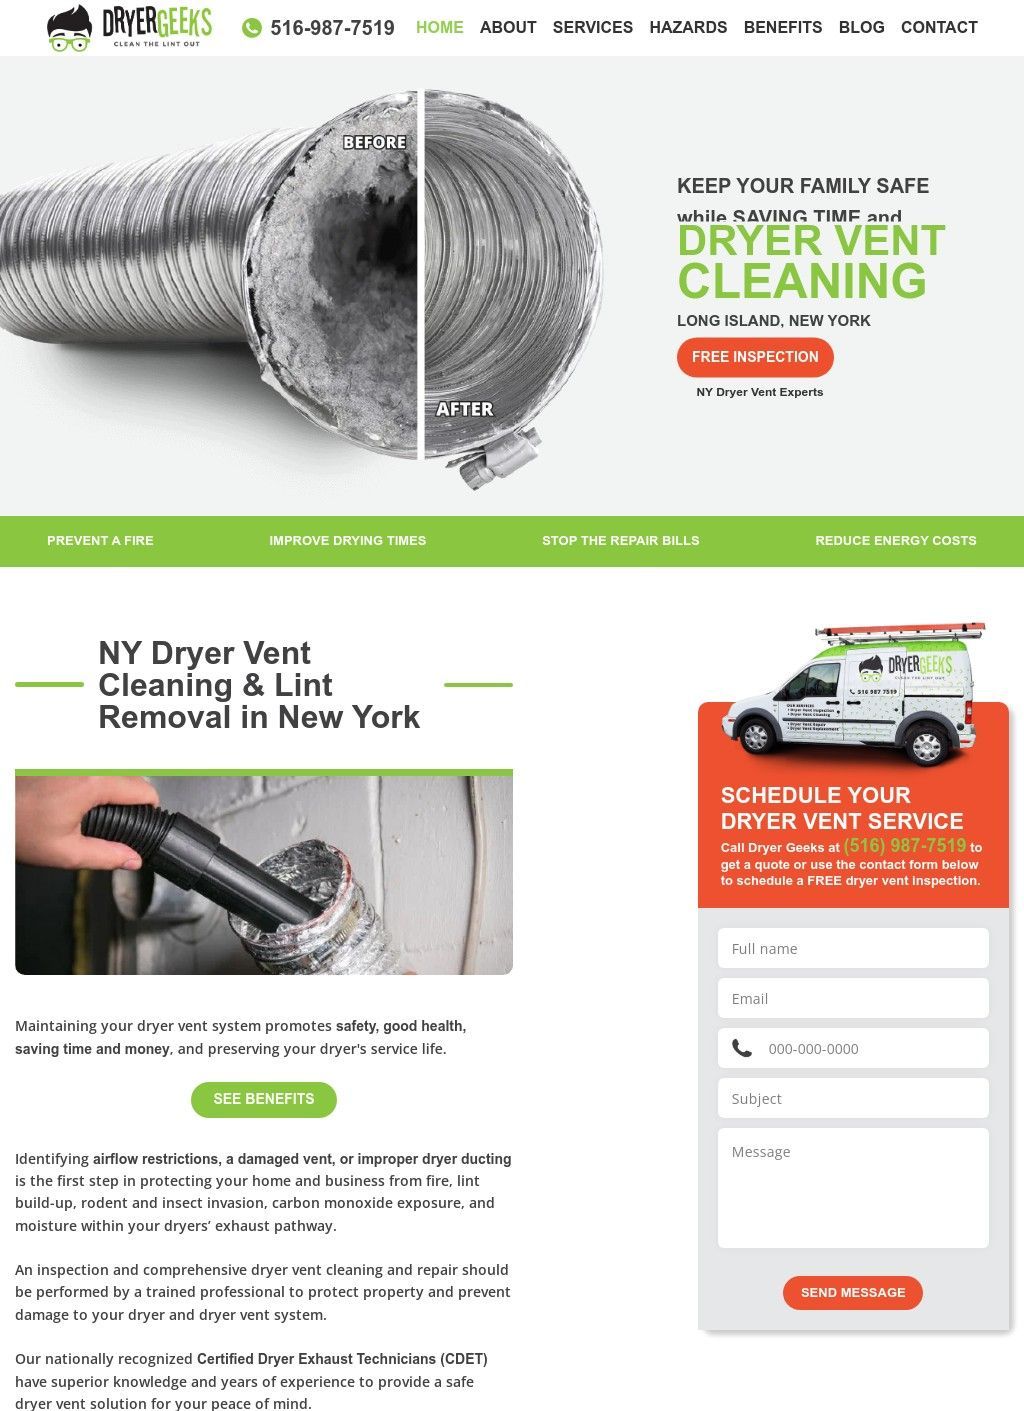 Dryer Vent Cleaning Company in Long Island NY